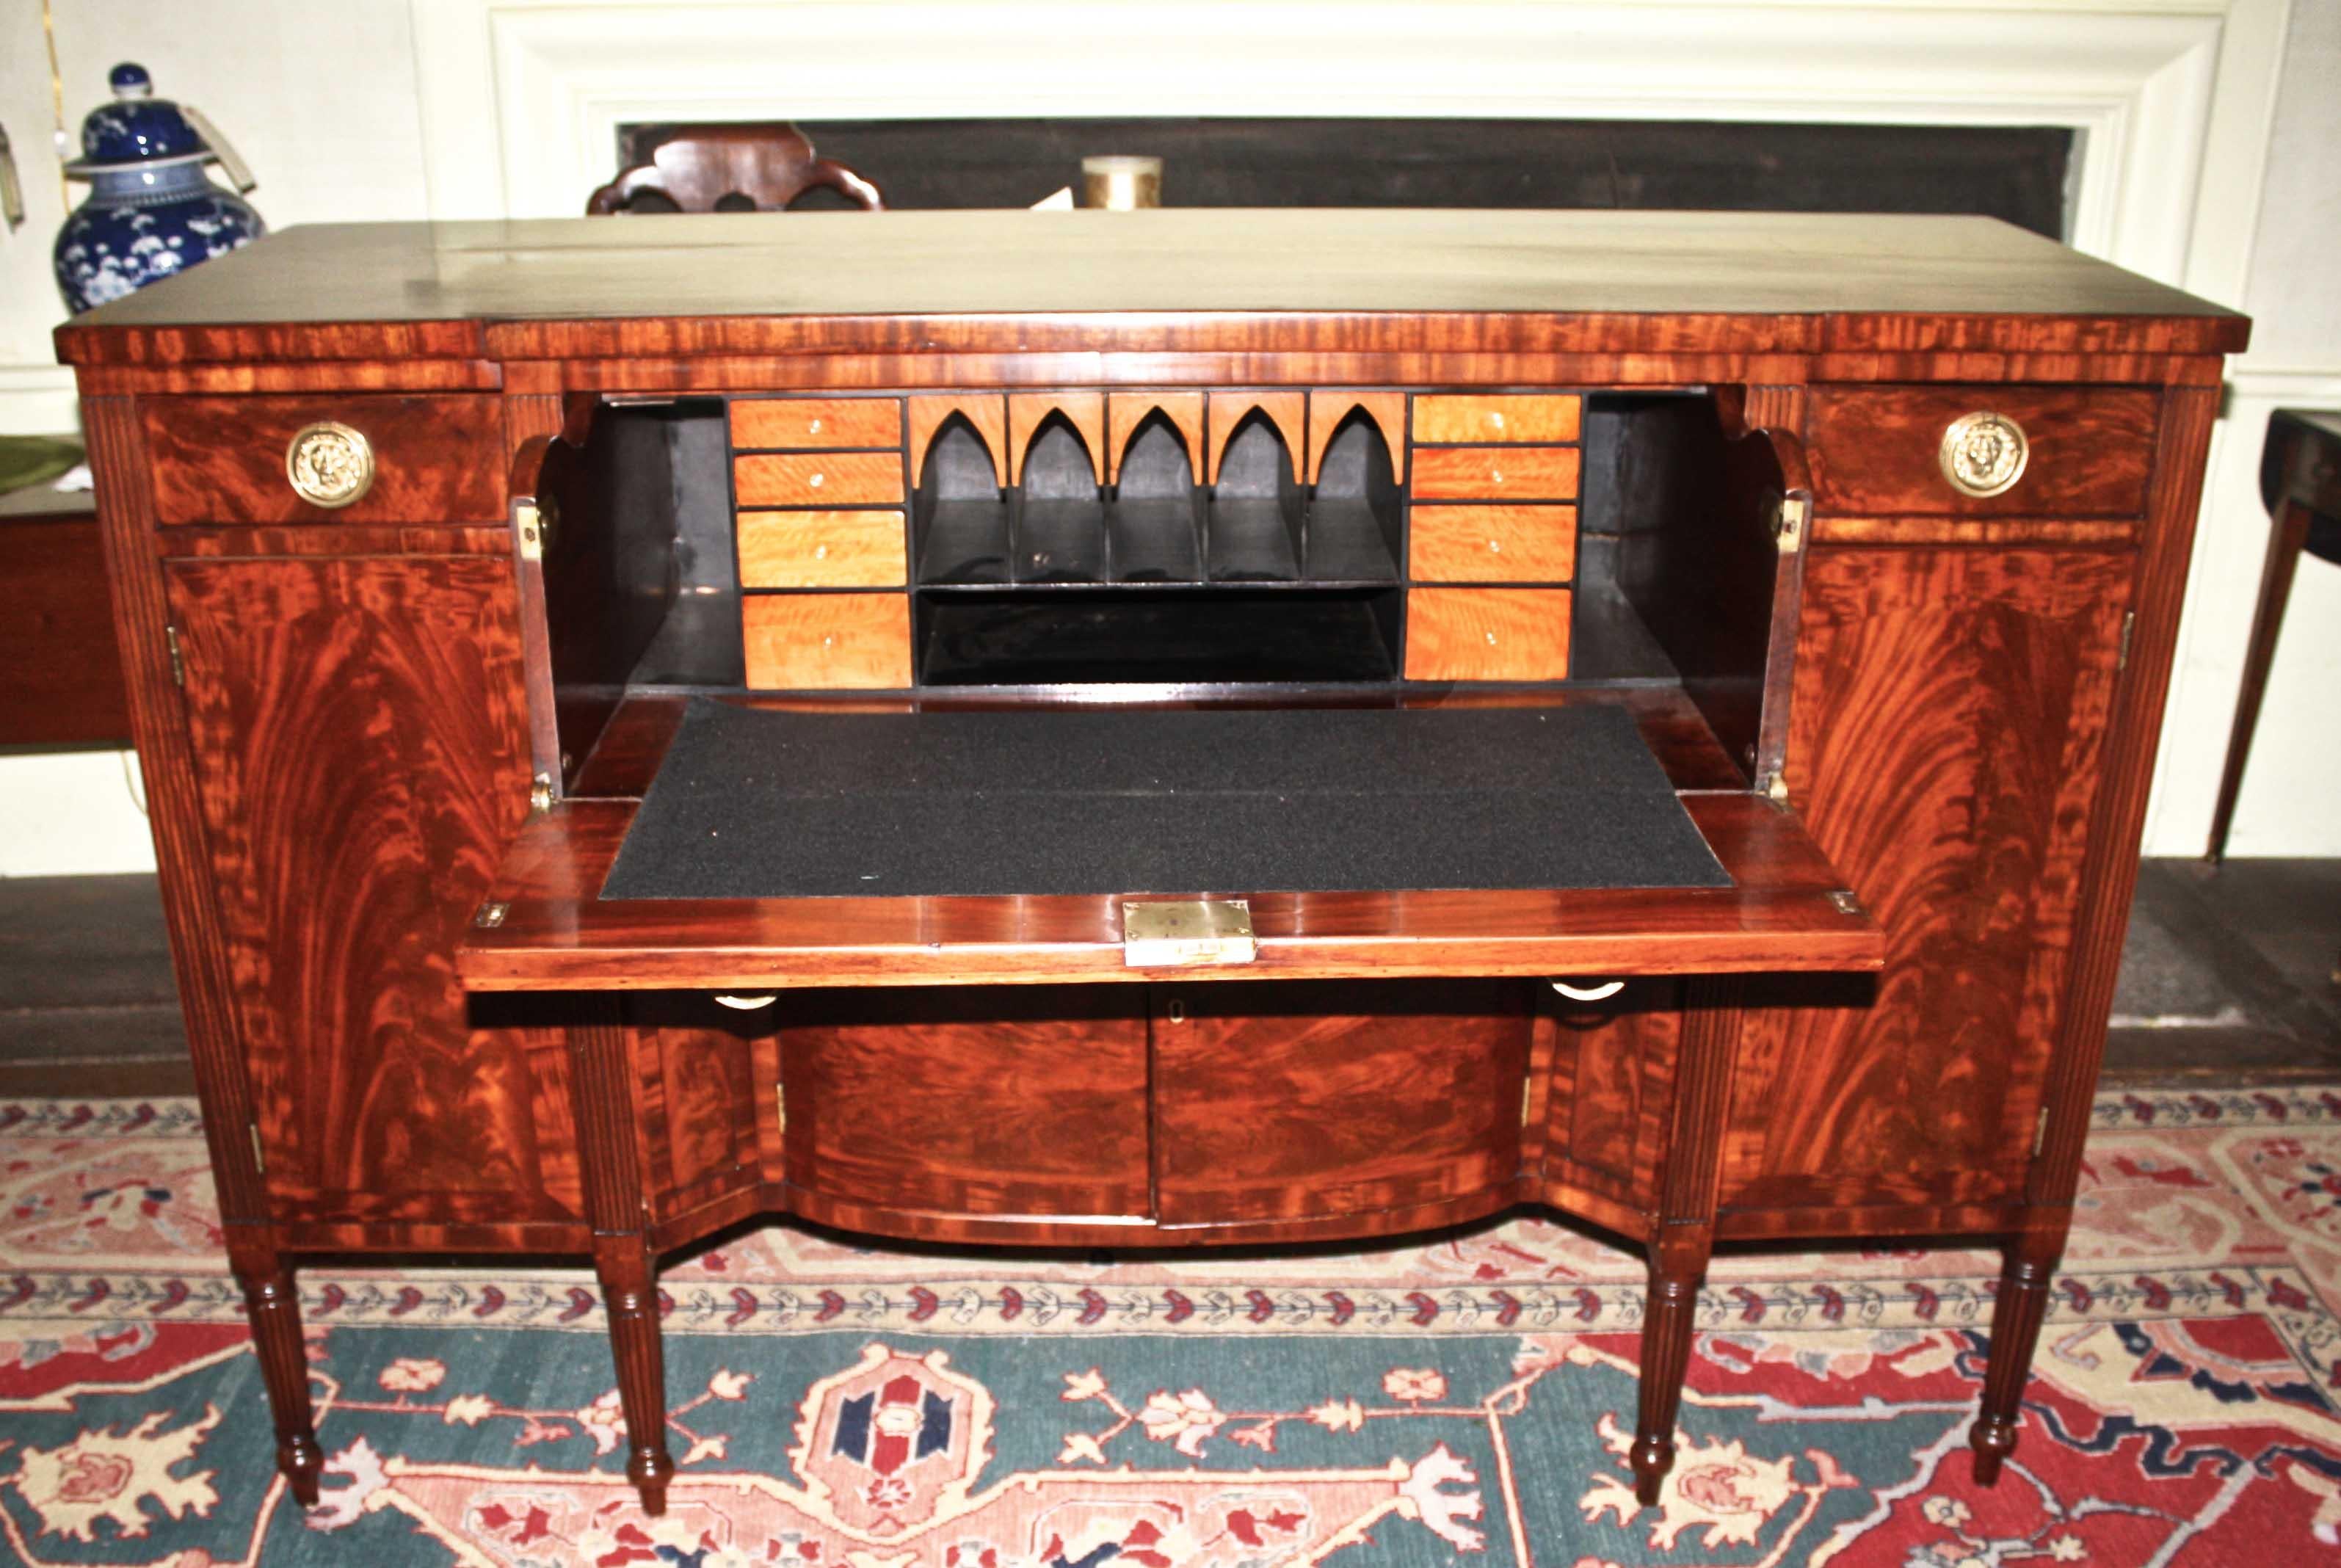 A Bankson and Lawson 'School', Sheraton manner sideboard with a English influenced fall-front butler's secretary drawer. Exceptionally vibrant crotch and flame mahogany veneers and bandings; the secretary desk is fitted with sharply contrasting